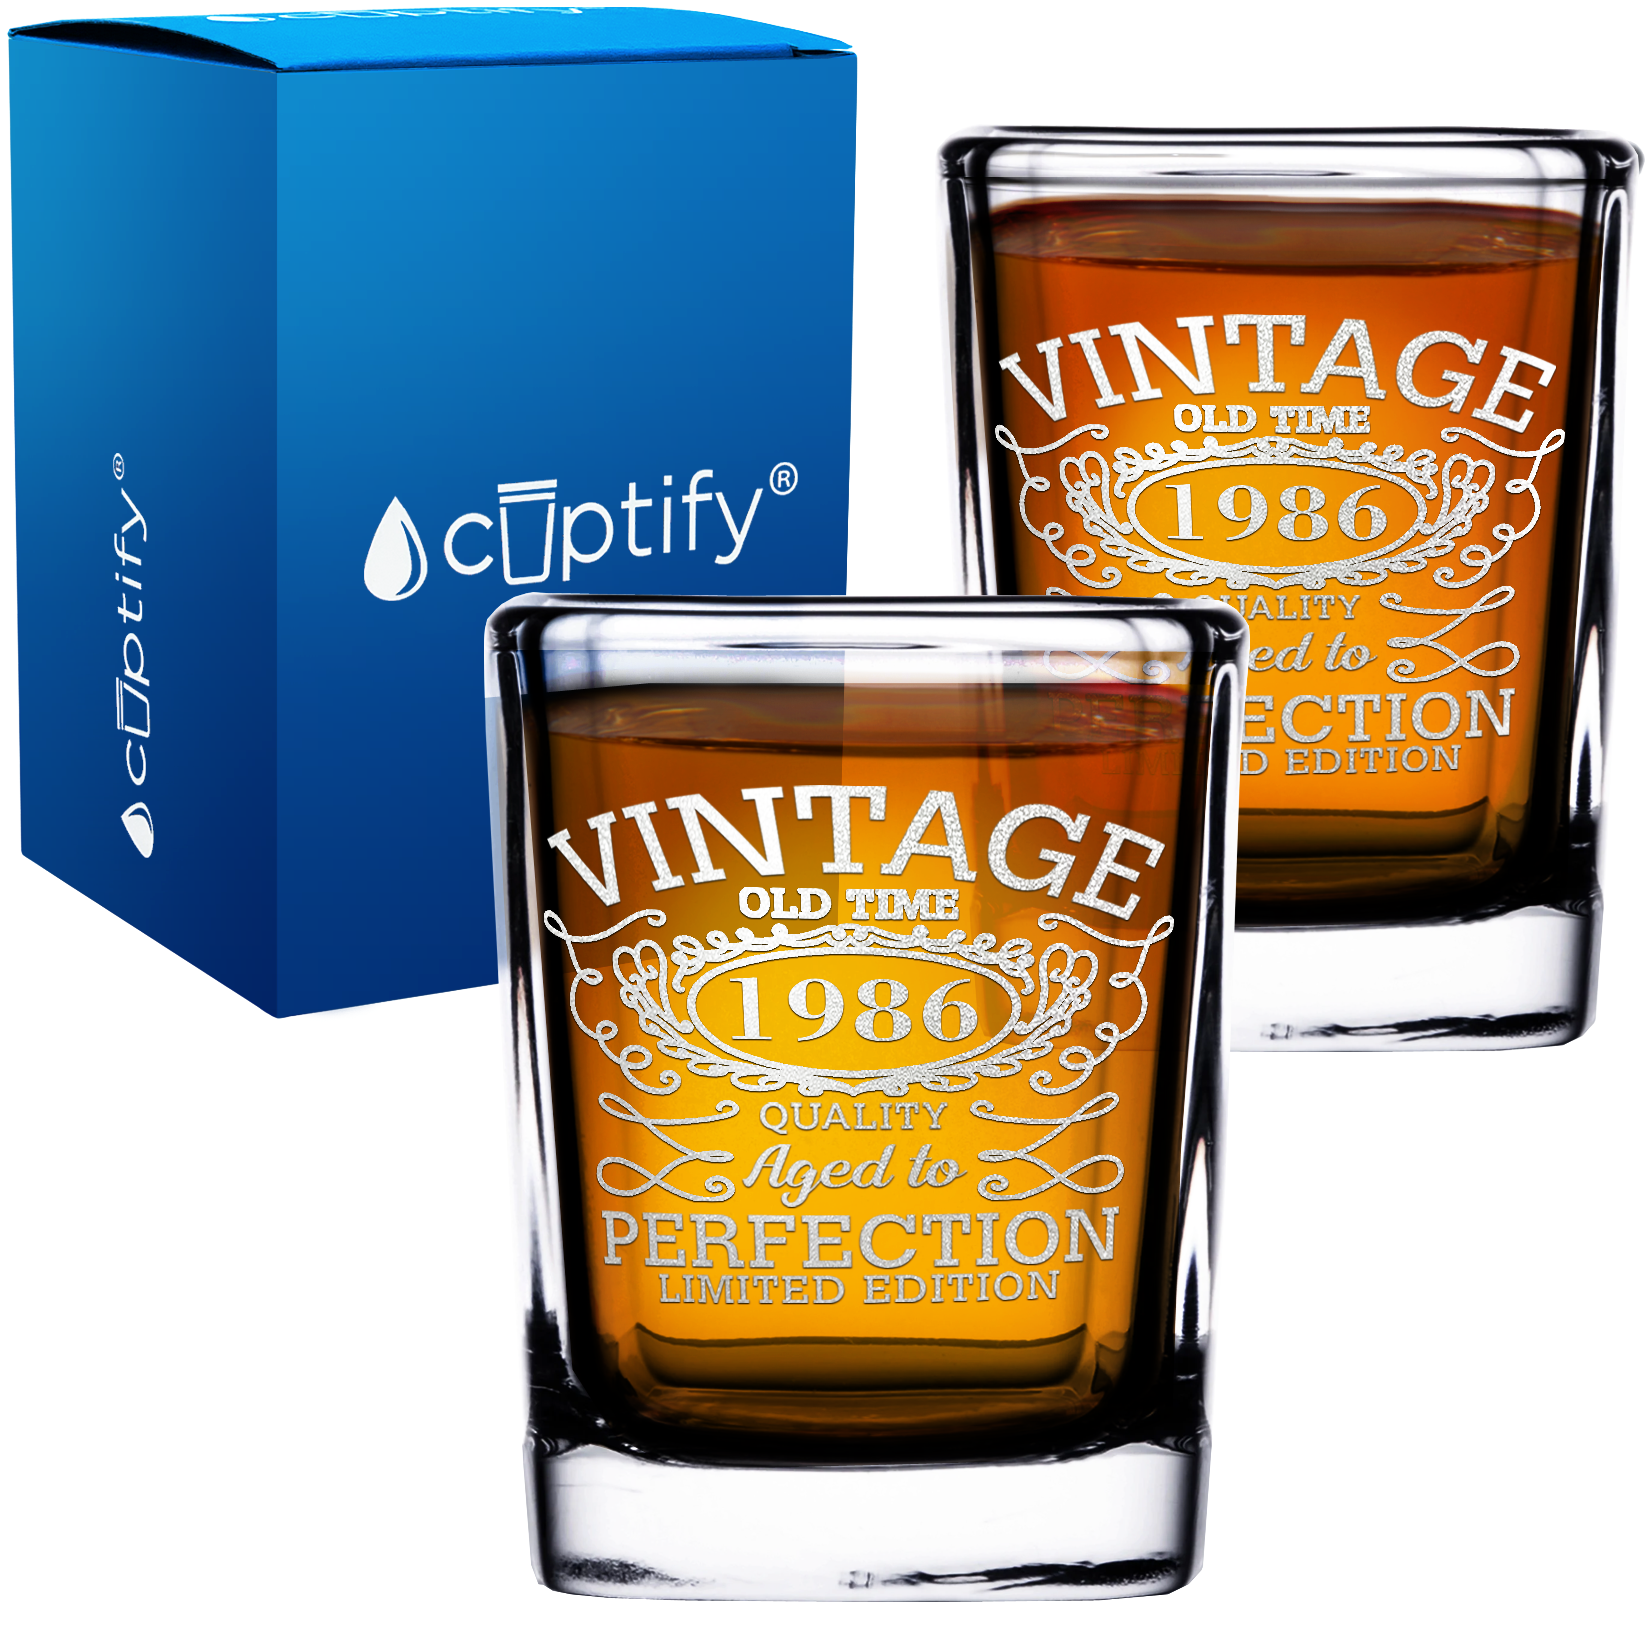 36th Birthday Vintage 36 Years Old Time 1986 Quality 2oz Square Shot Glasses - Set of 2